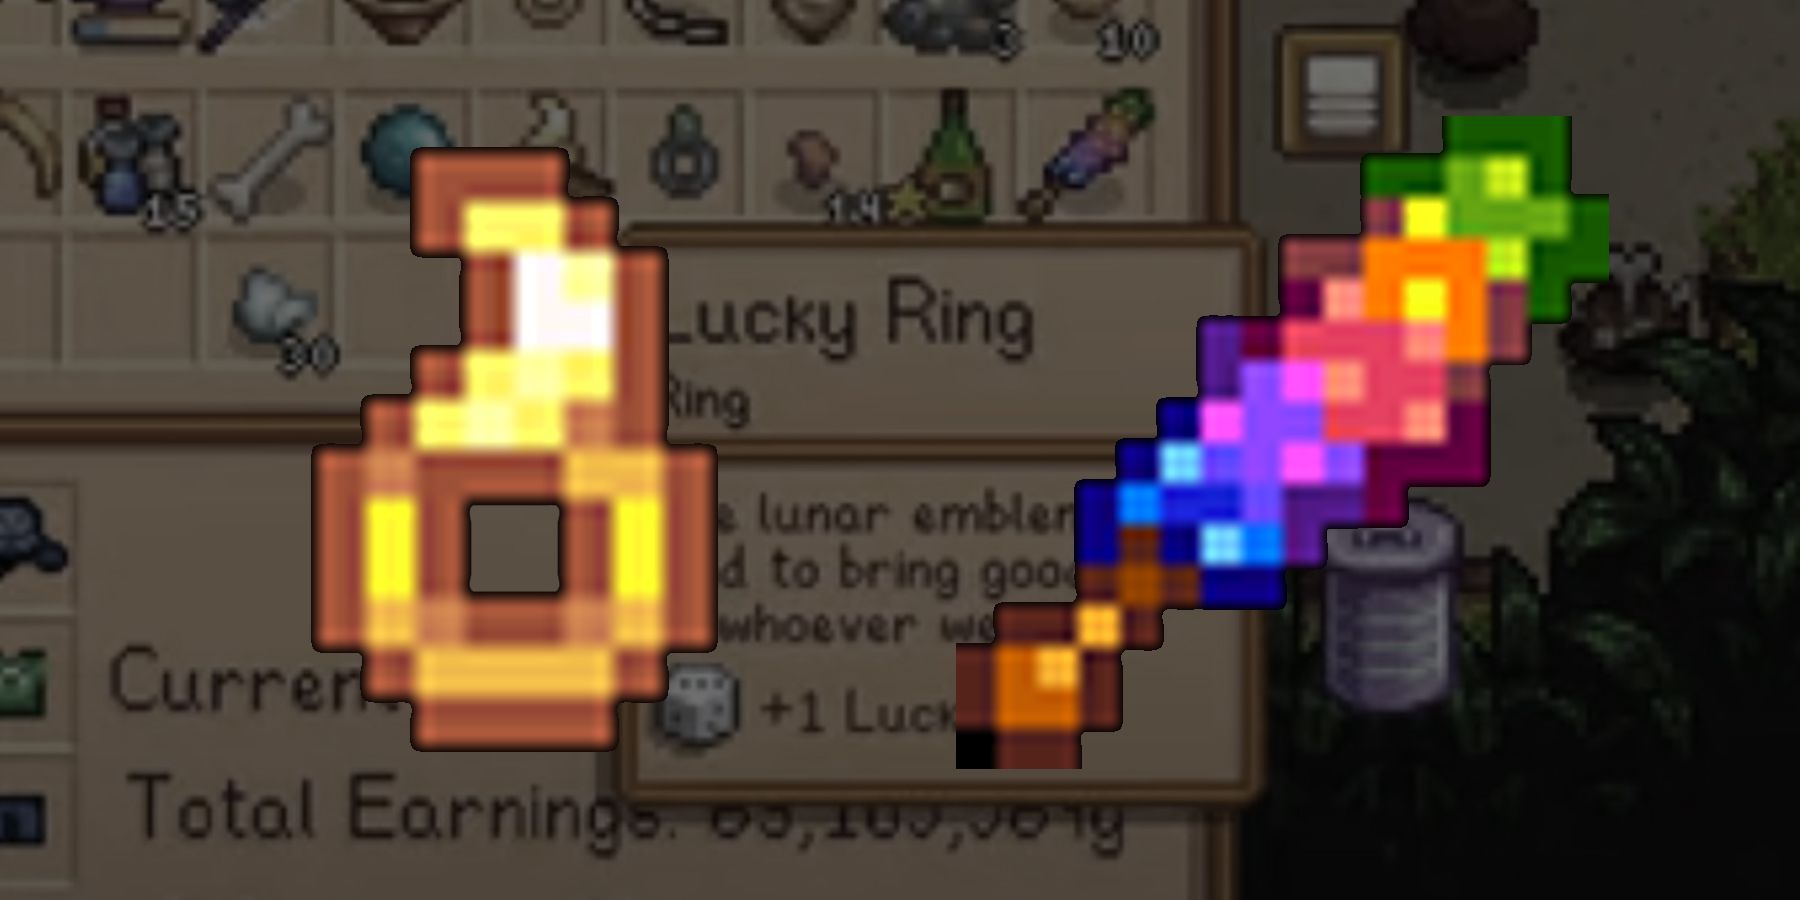 Other Sources of Luck in Stardew Valley